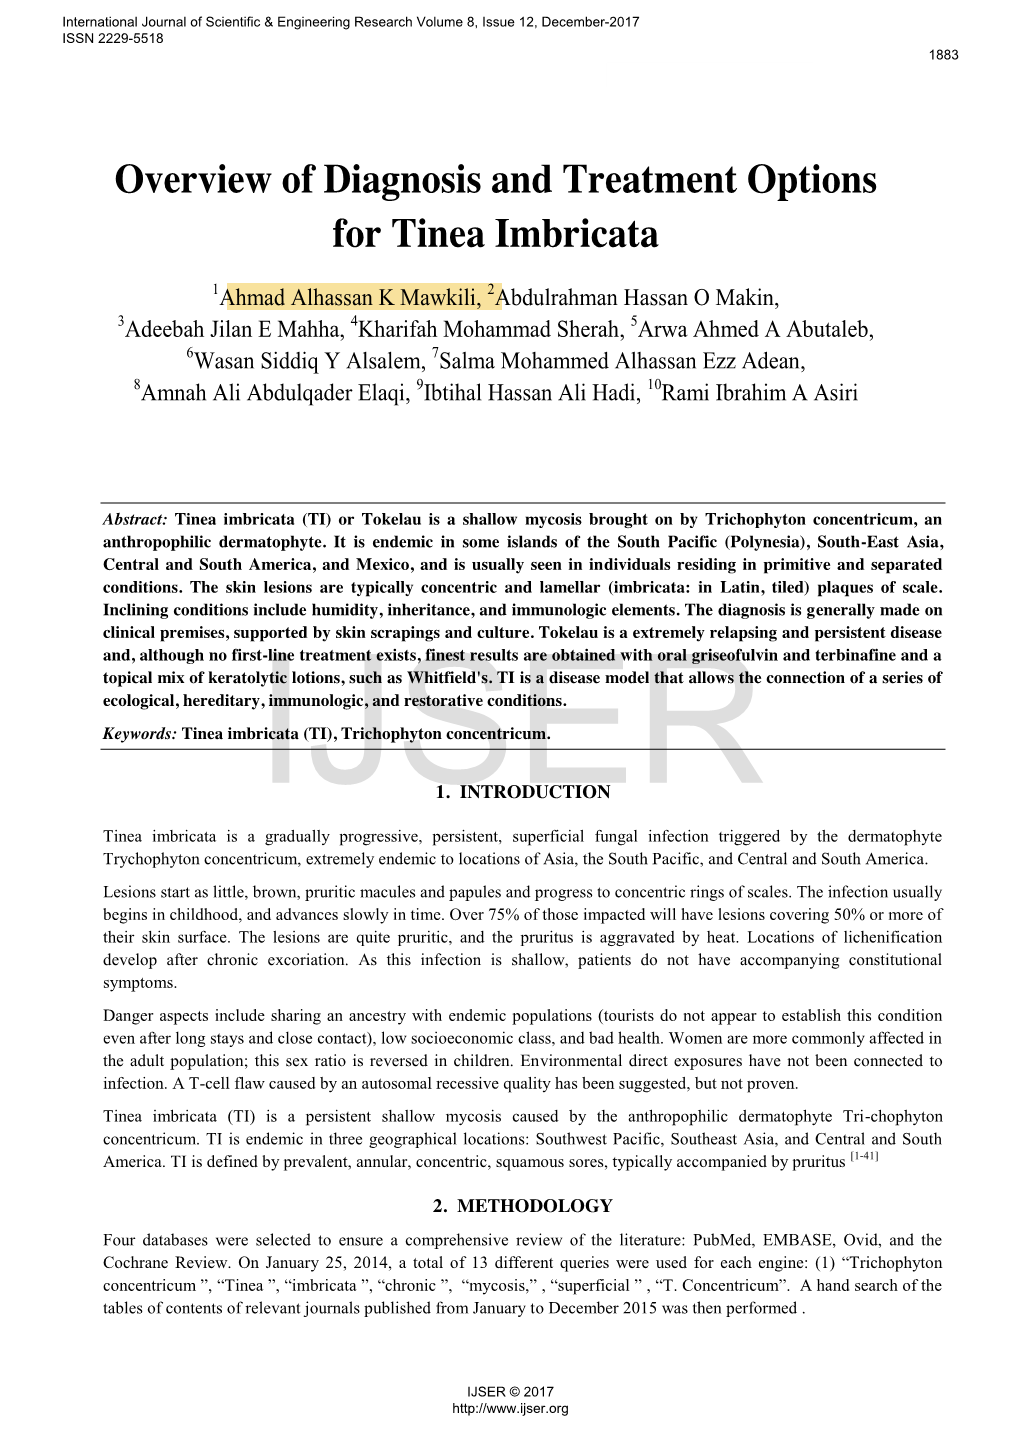 Overview of Diagnosis and Treatment Options for Tinea Imbricata